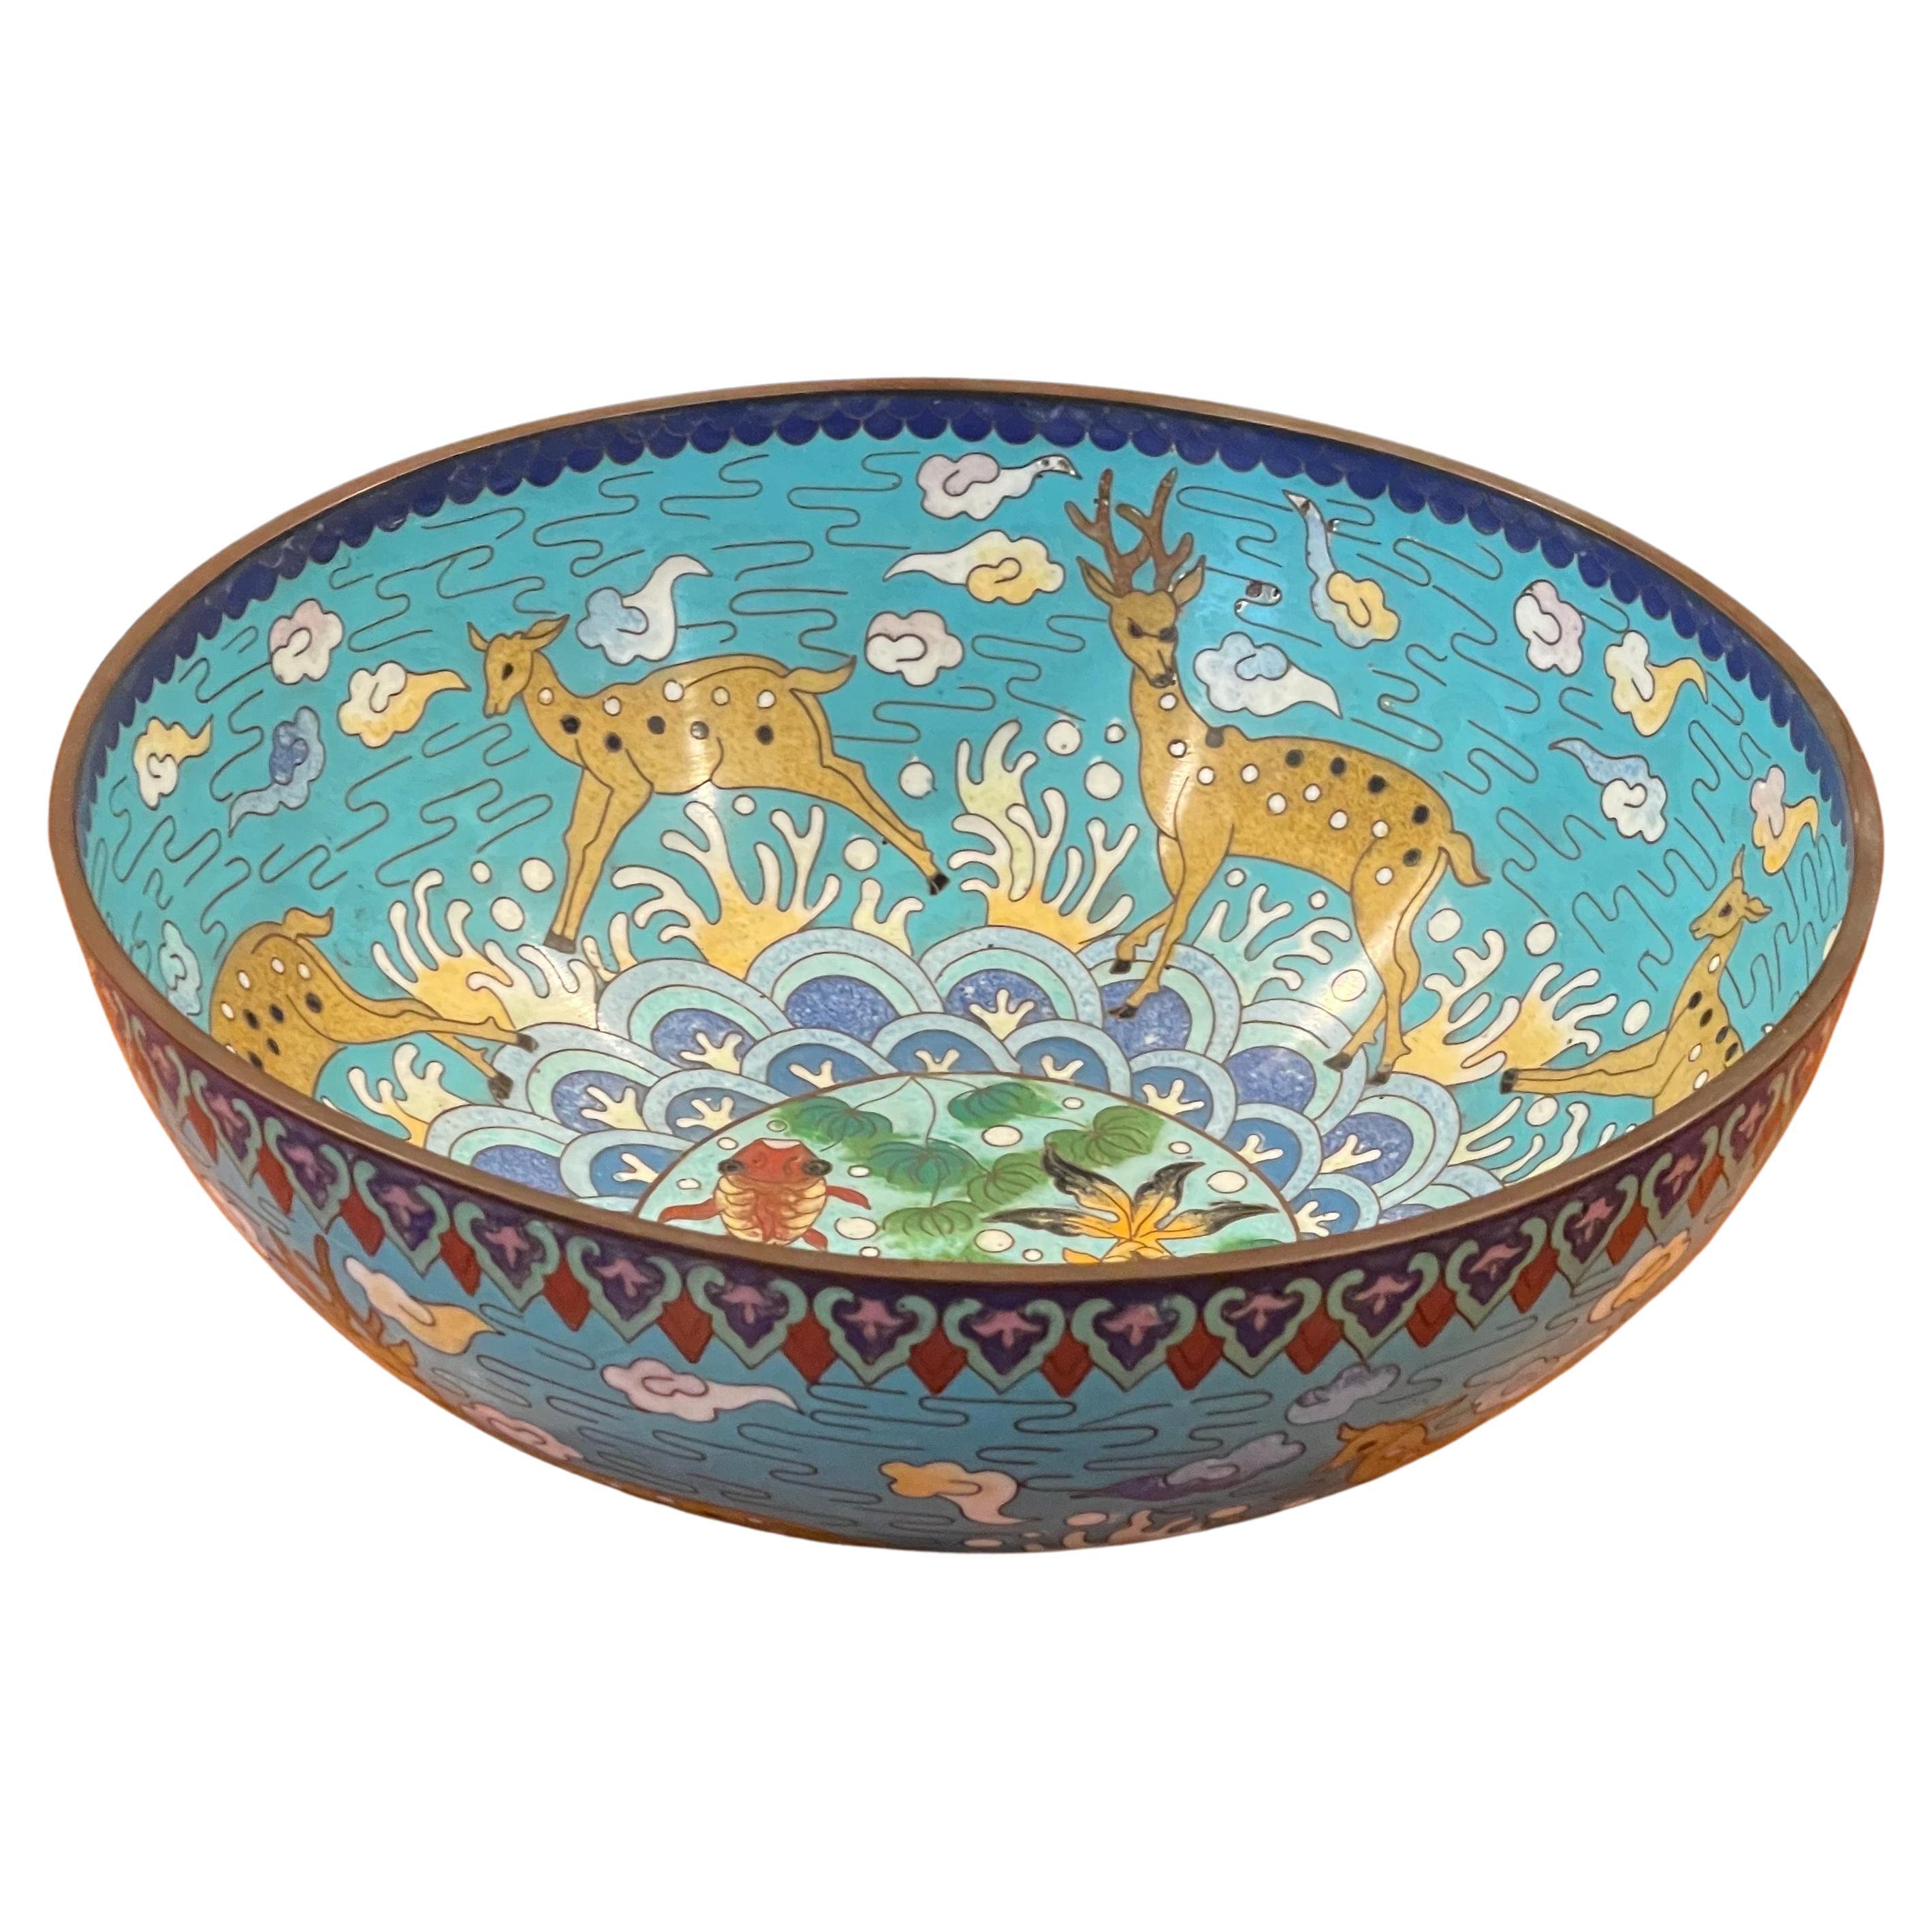 Vintage Chinese cloisonné bowl with deer and koi fish motif, circa 1950s. The piece is is in very good vintage condition and measures 10